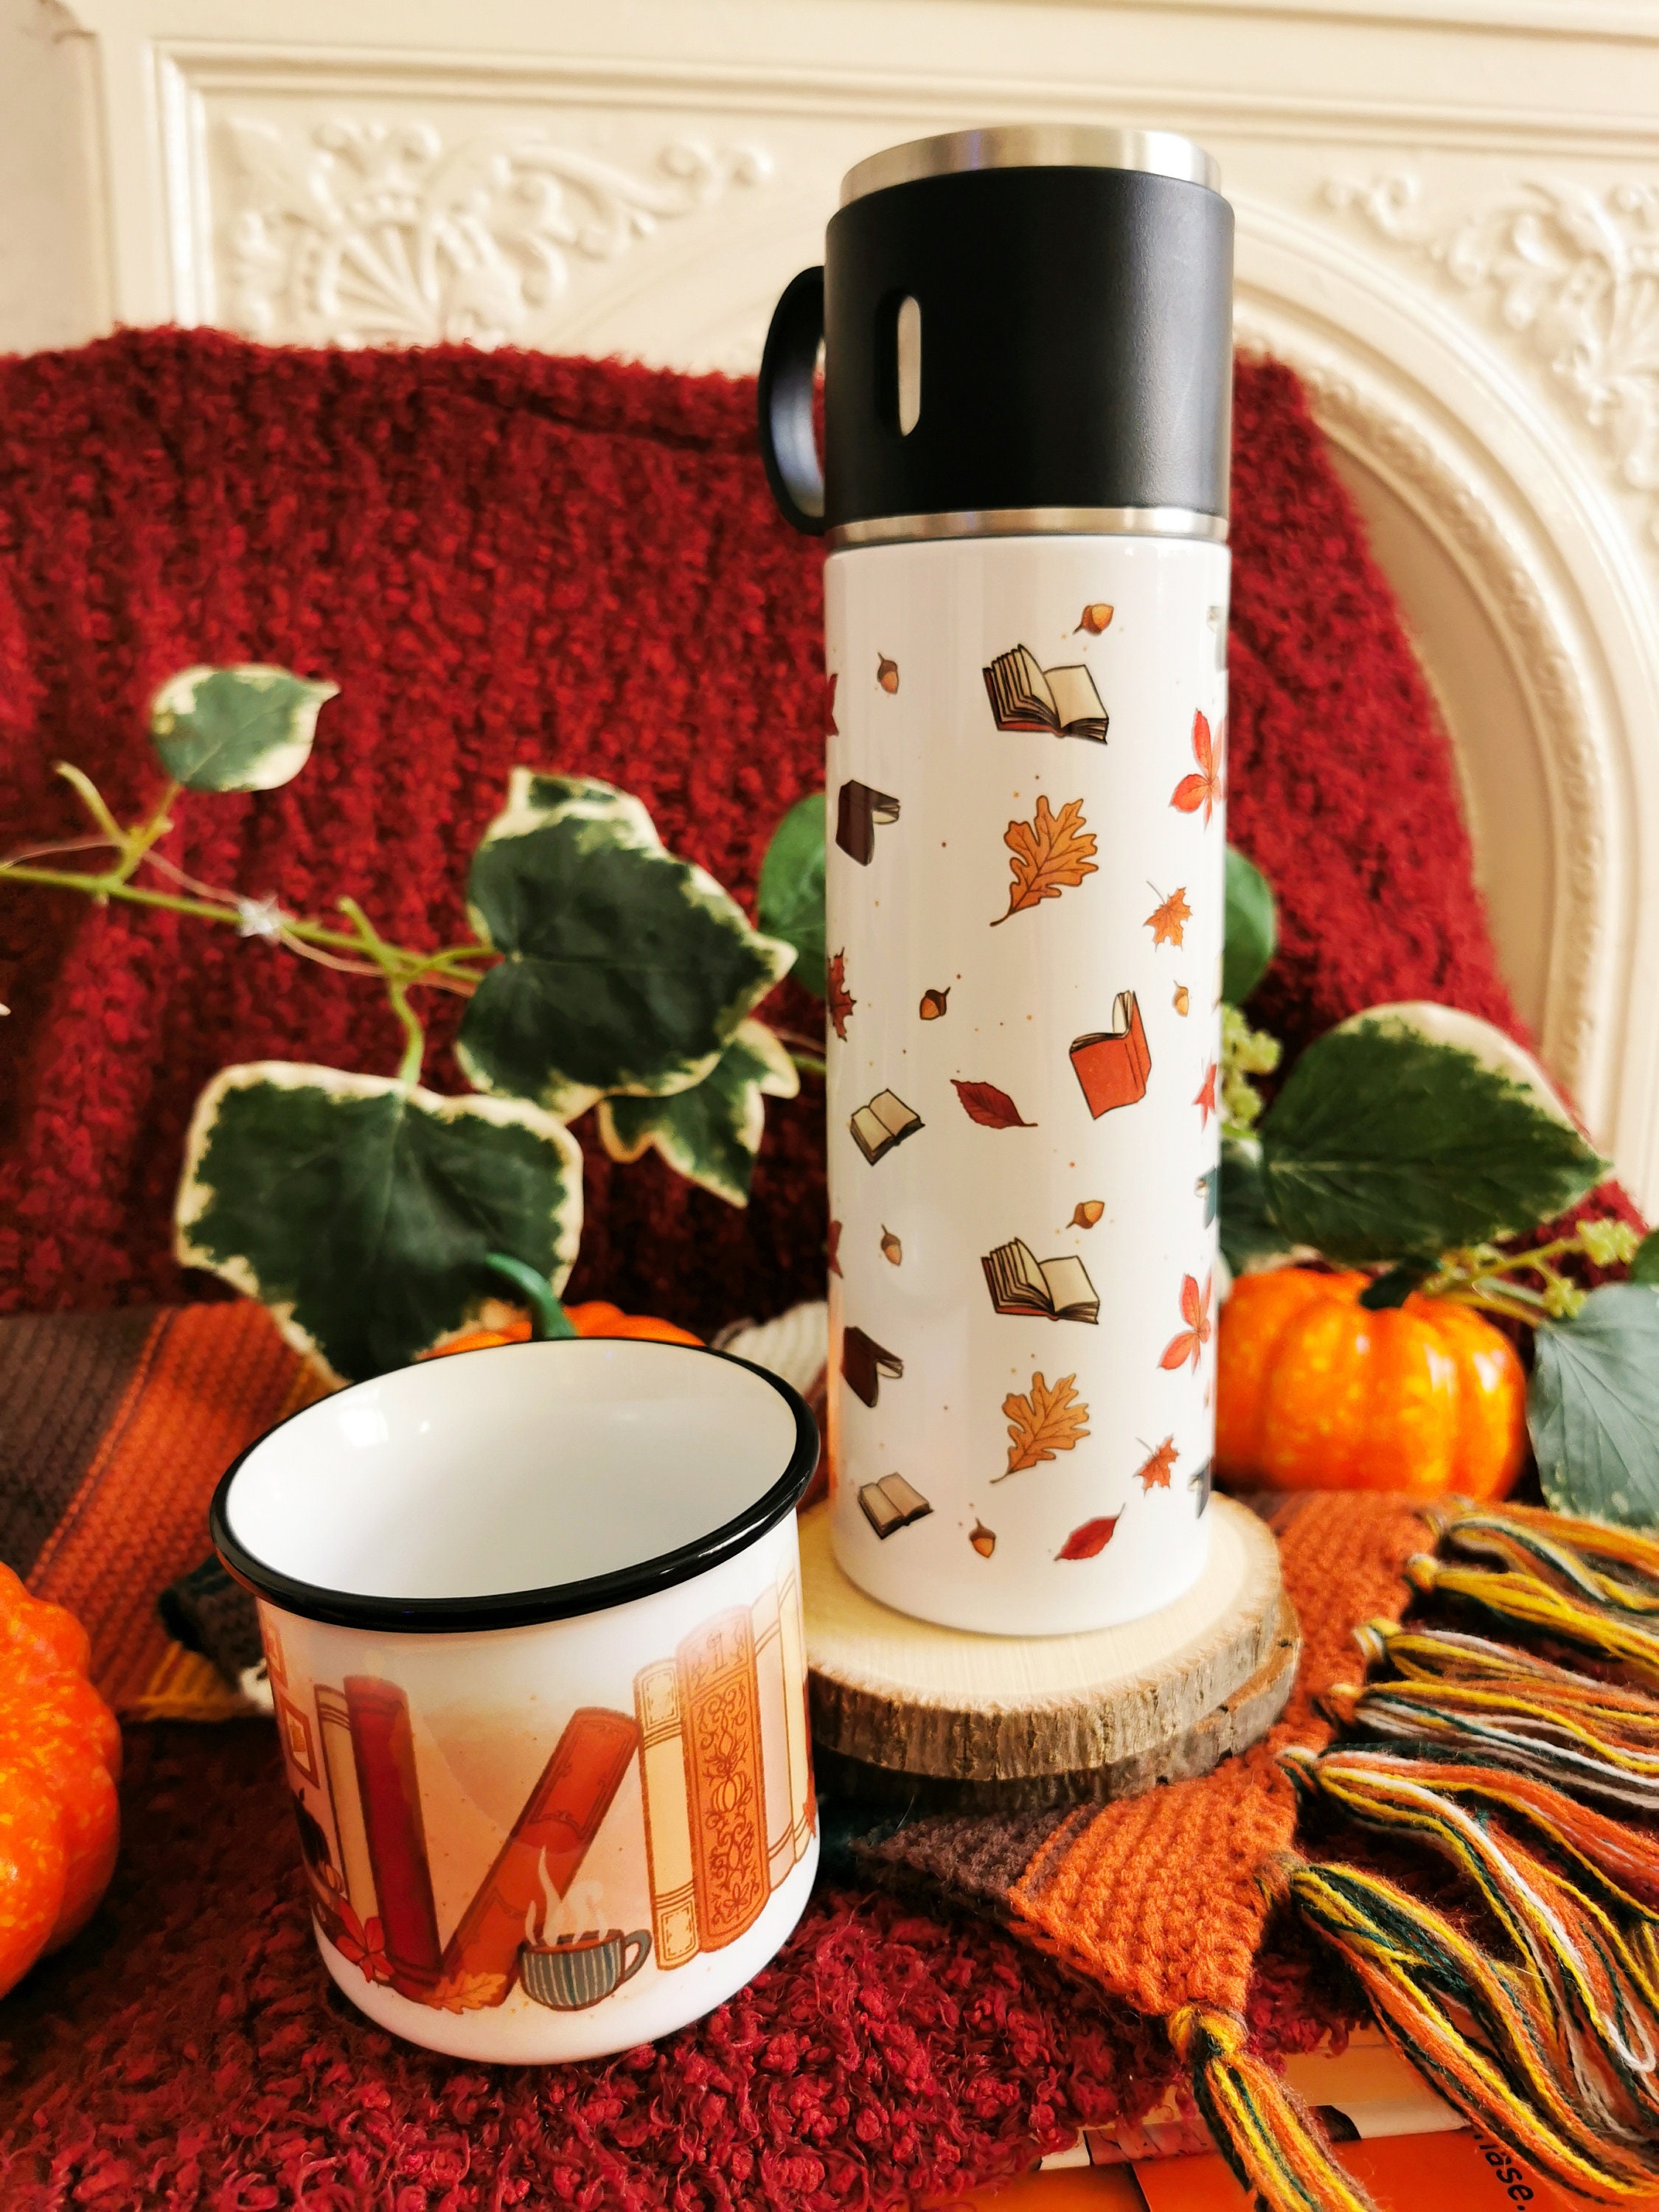 Cute Thermos Bottle Aesthetic For Hot Cold Coffee Tea Juice Kawaii